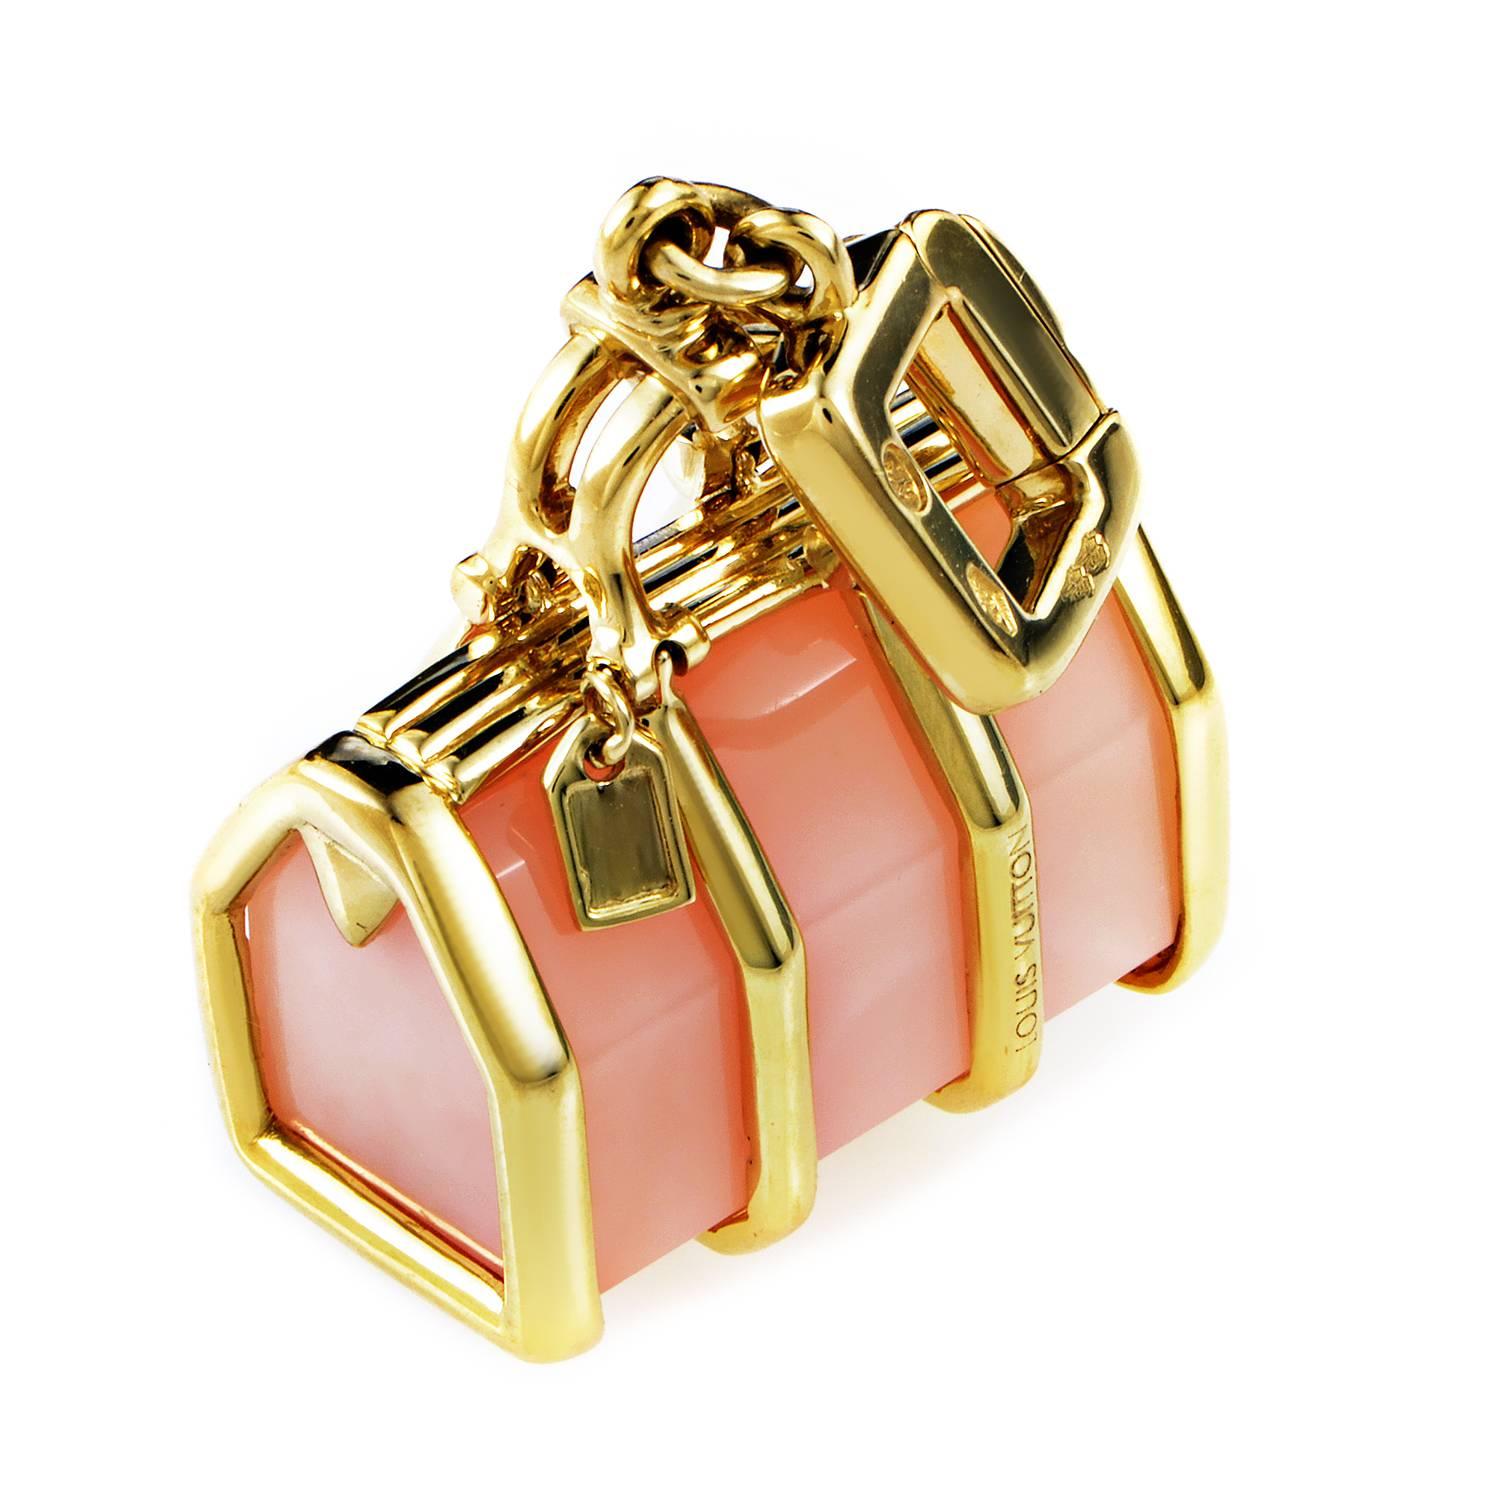 Exuding pure femininity and a charming allure through its precious combination of radiant 18K yellow gold and tender pink quartz in the lovely shape of a handbag, this gorgeous charm from Louis Vuitton is a marvelously fashionable item.